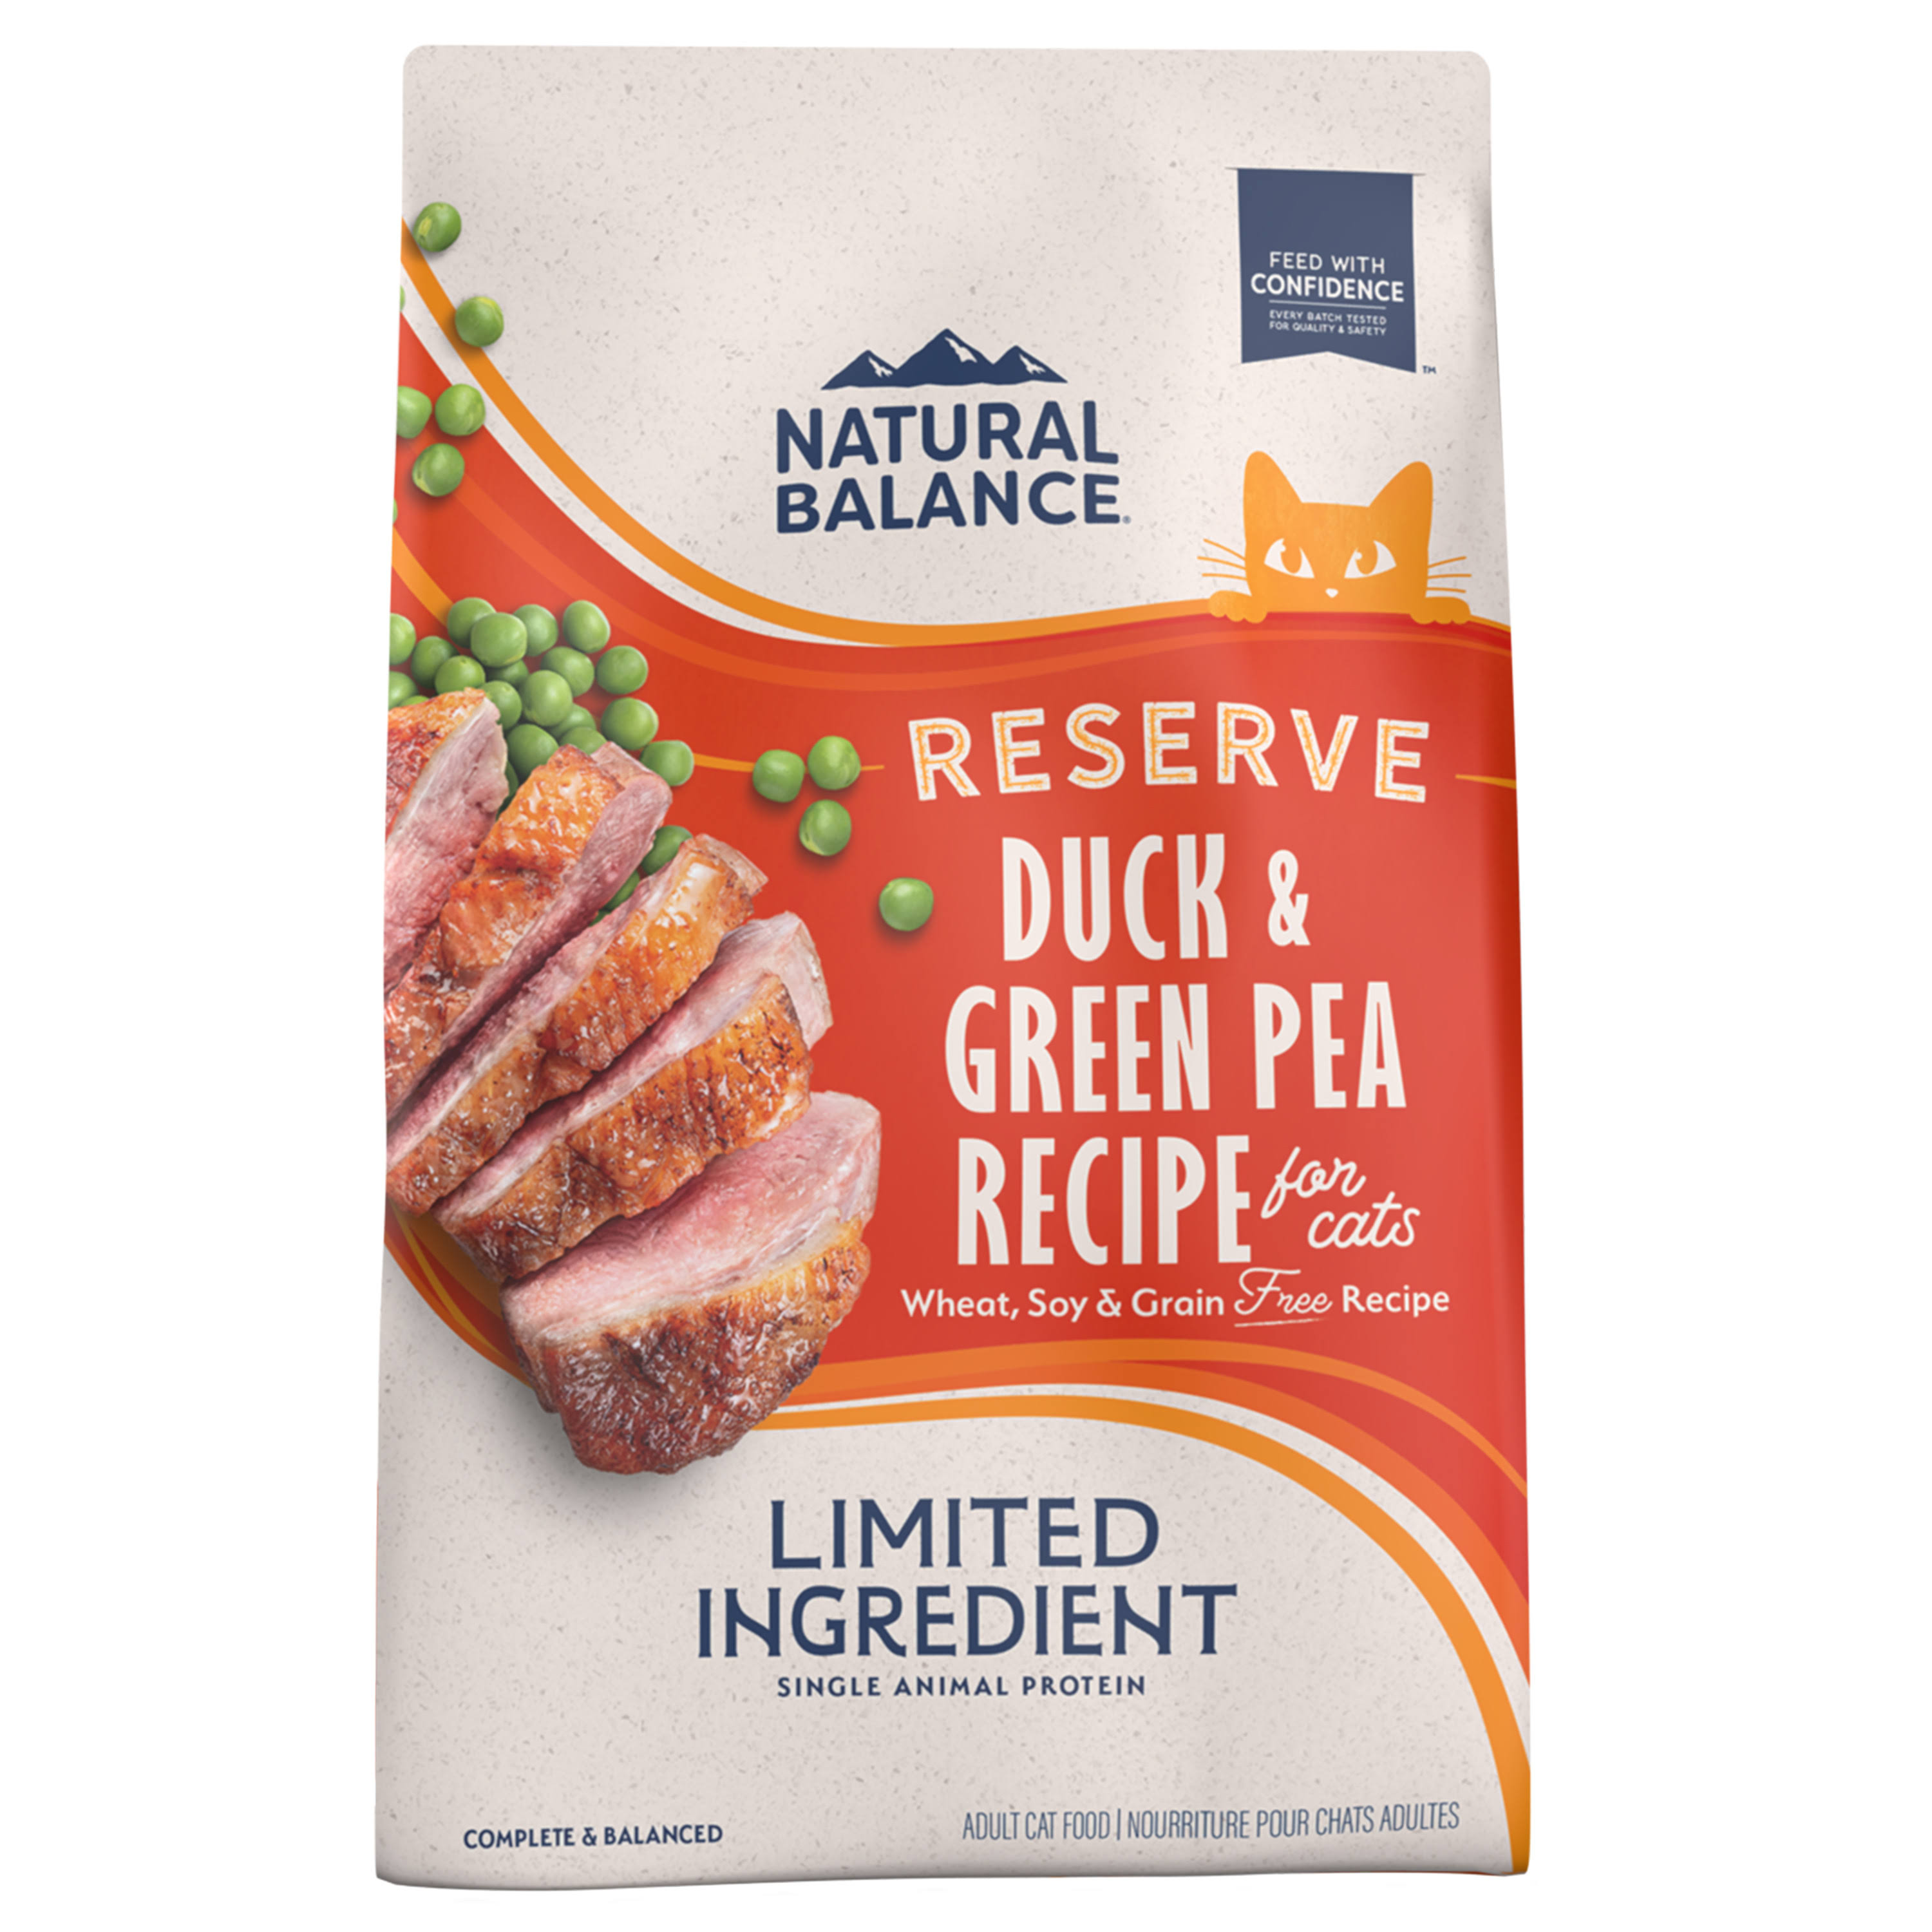 Natural Balance Cat Food - Green Pea and Duck